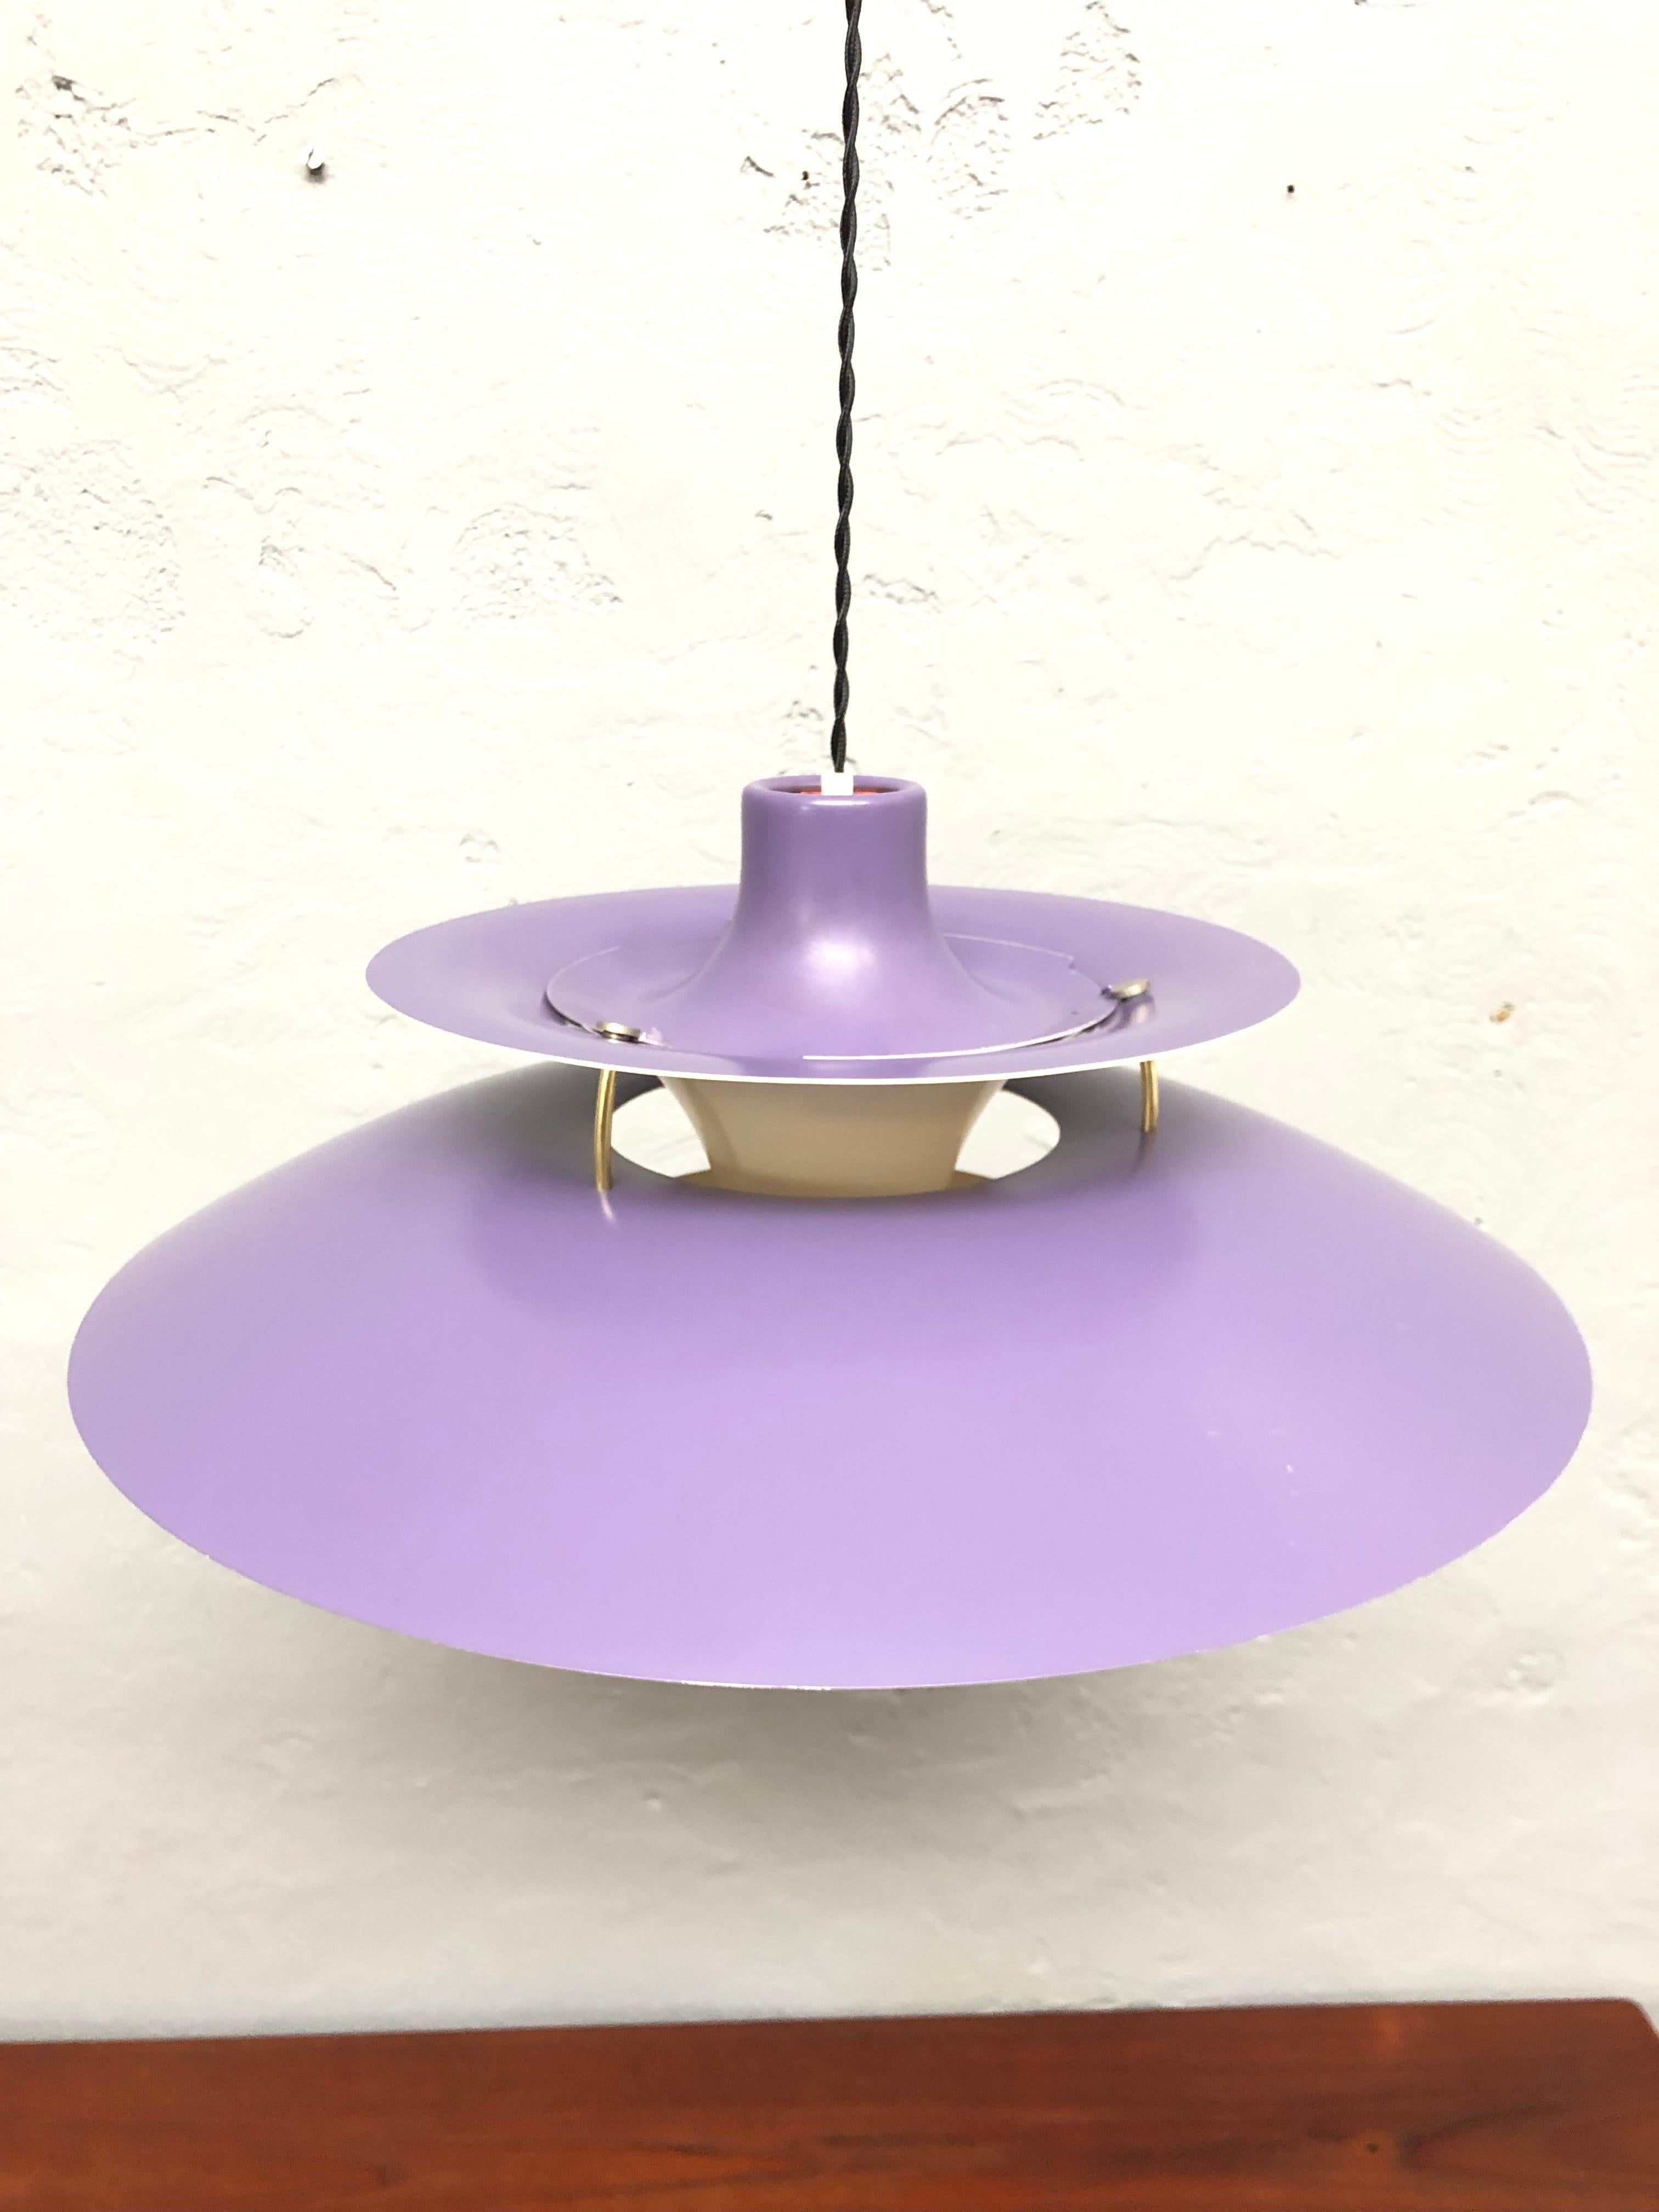 Mid-Century Modern Iconic Rare 1st Edition Poul Henningsen PH 5 Chandelier Pendant Lamp from 1958 For Sale